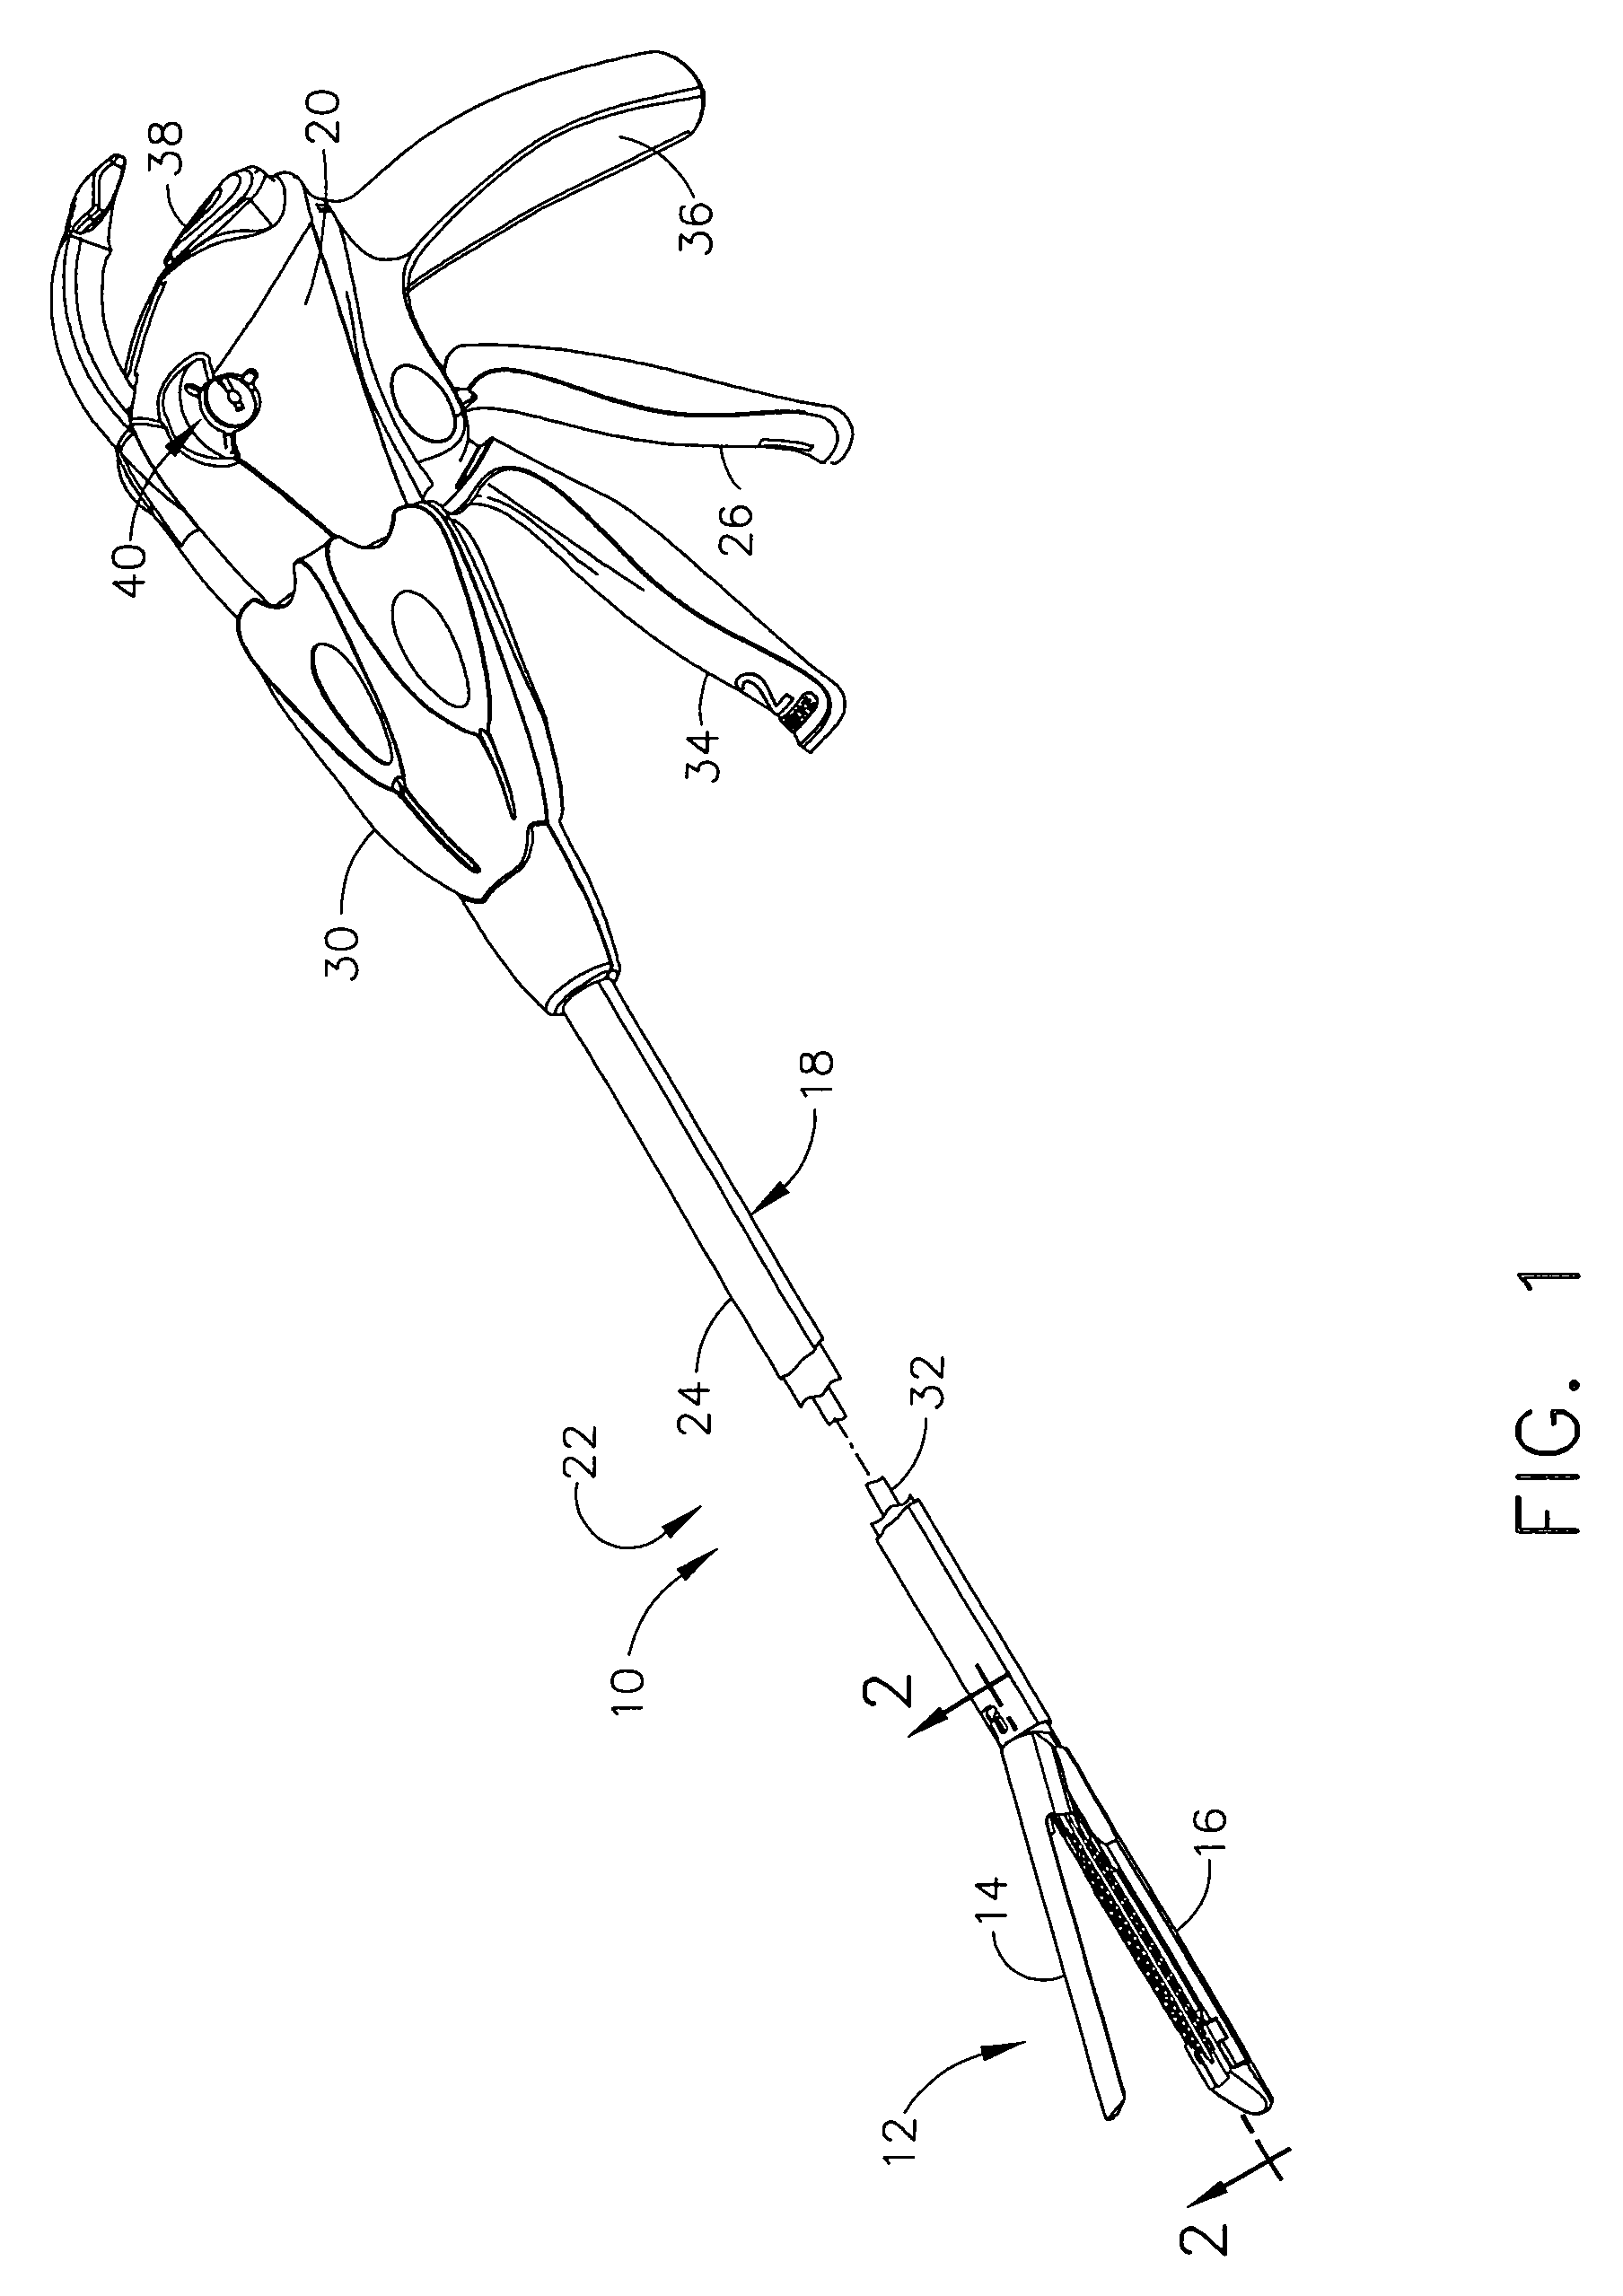 Surgical stapling and cutting instrument with travel-indicating retraction member